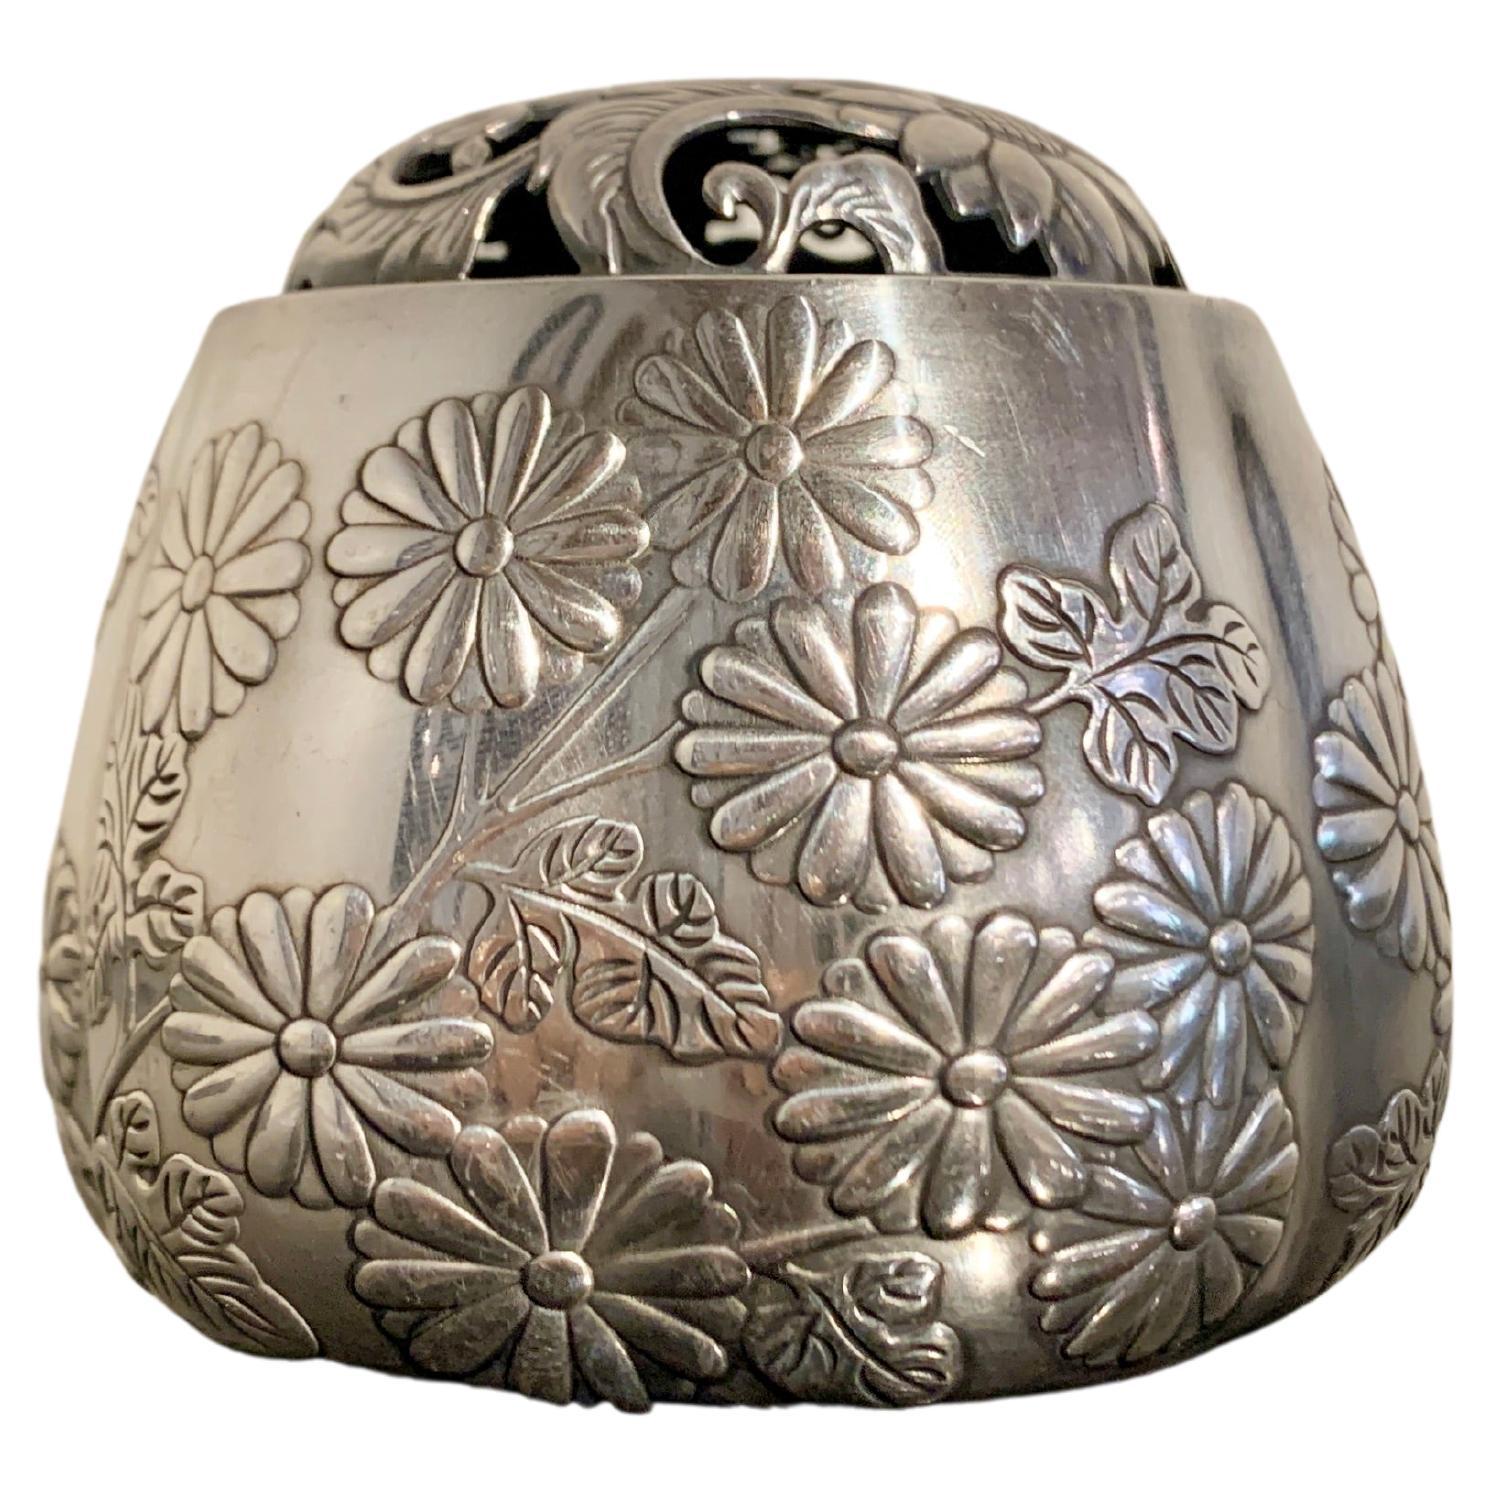 Hexagonal Incense Storage Box with Chrysanthemums in a Landscape